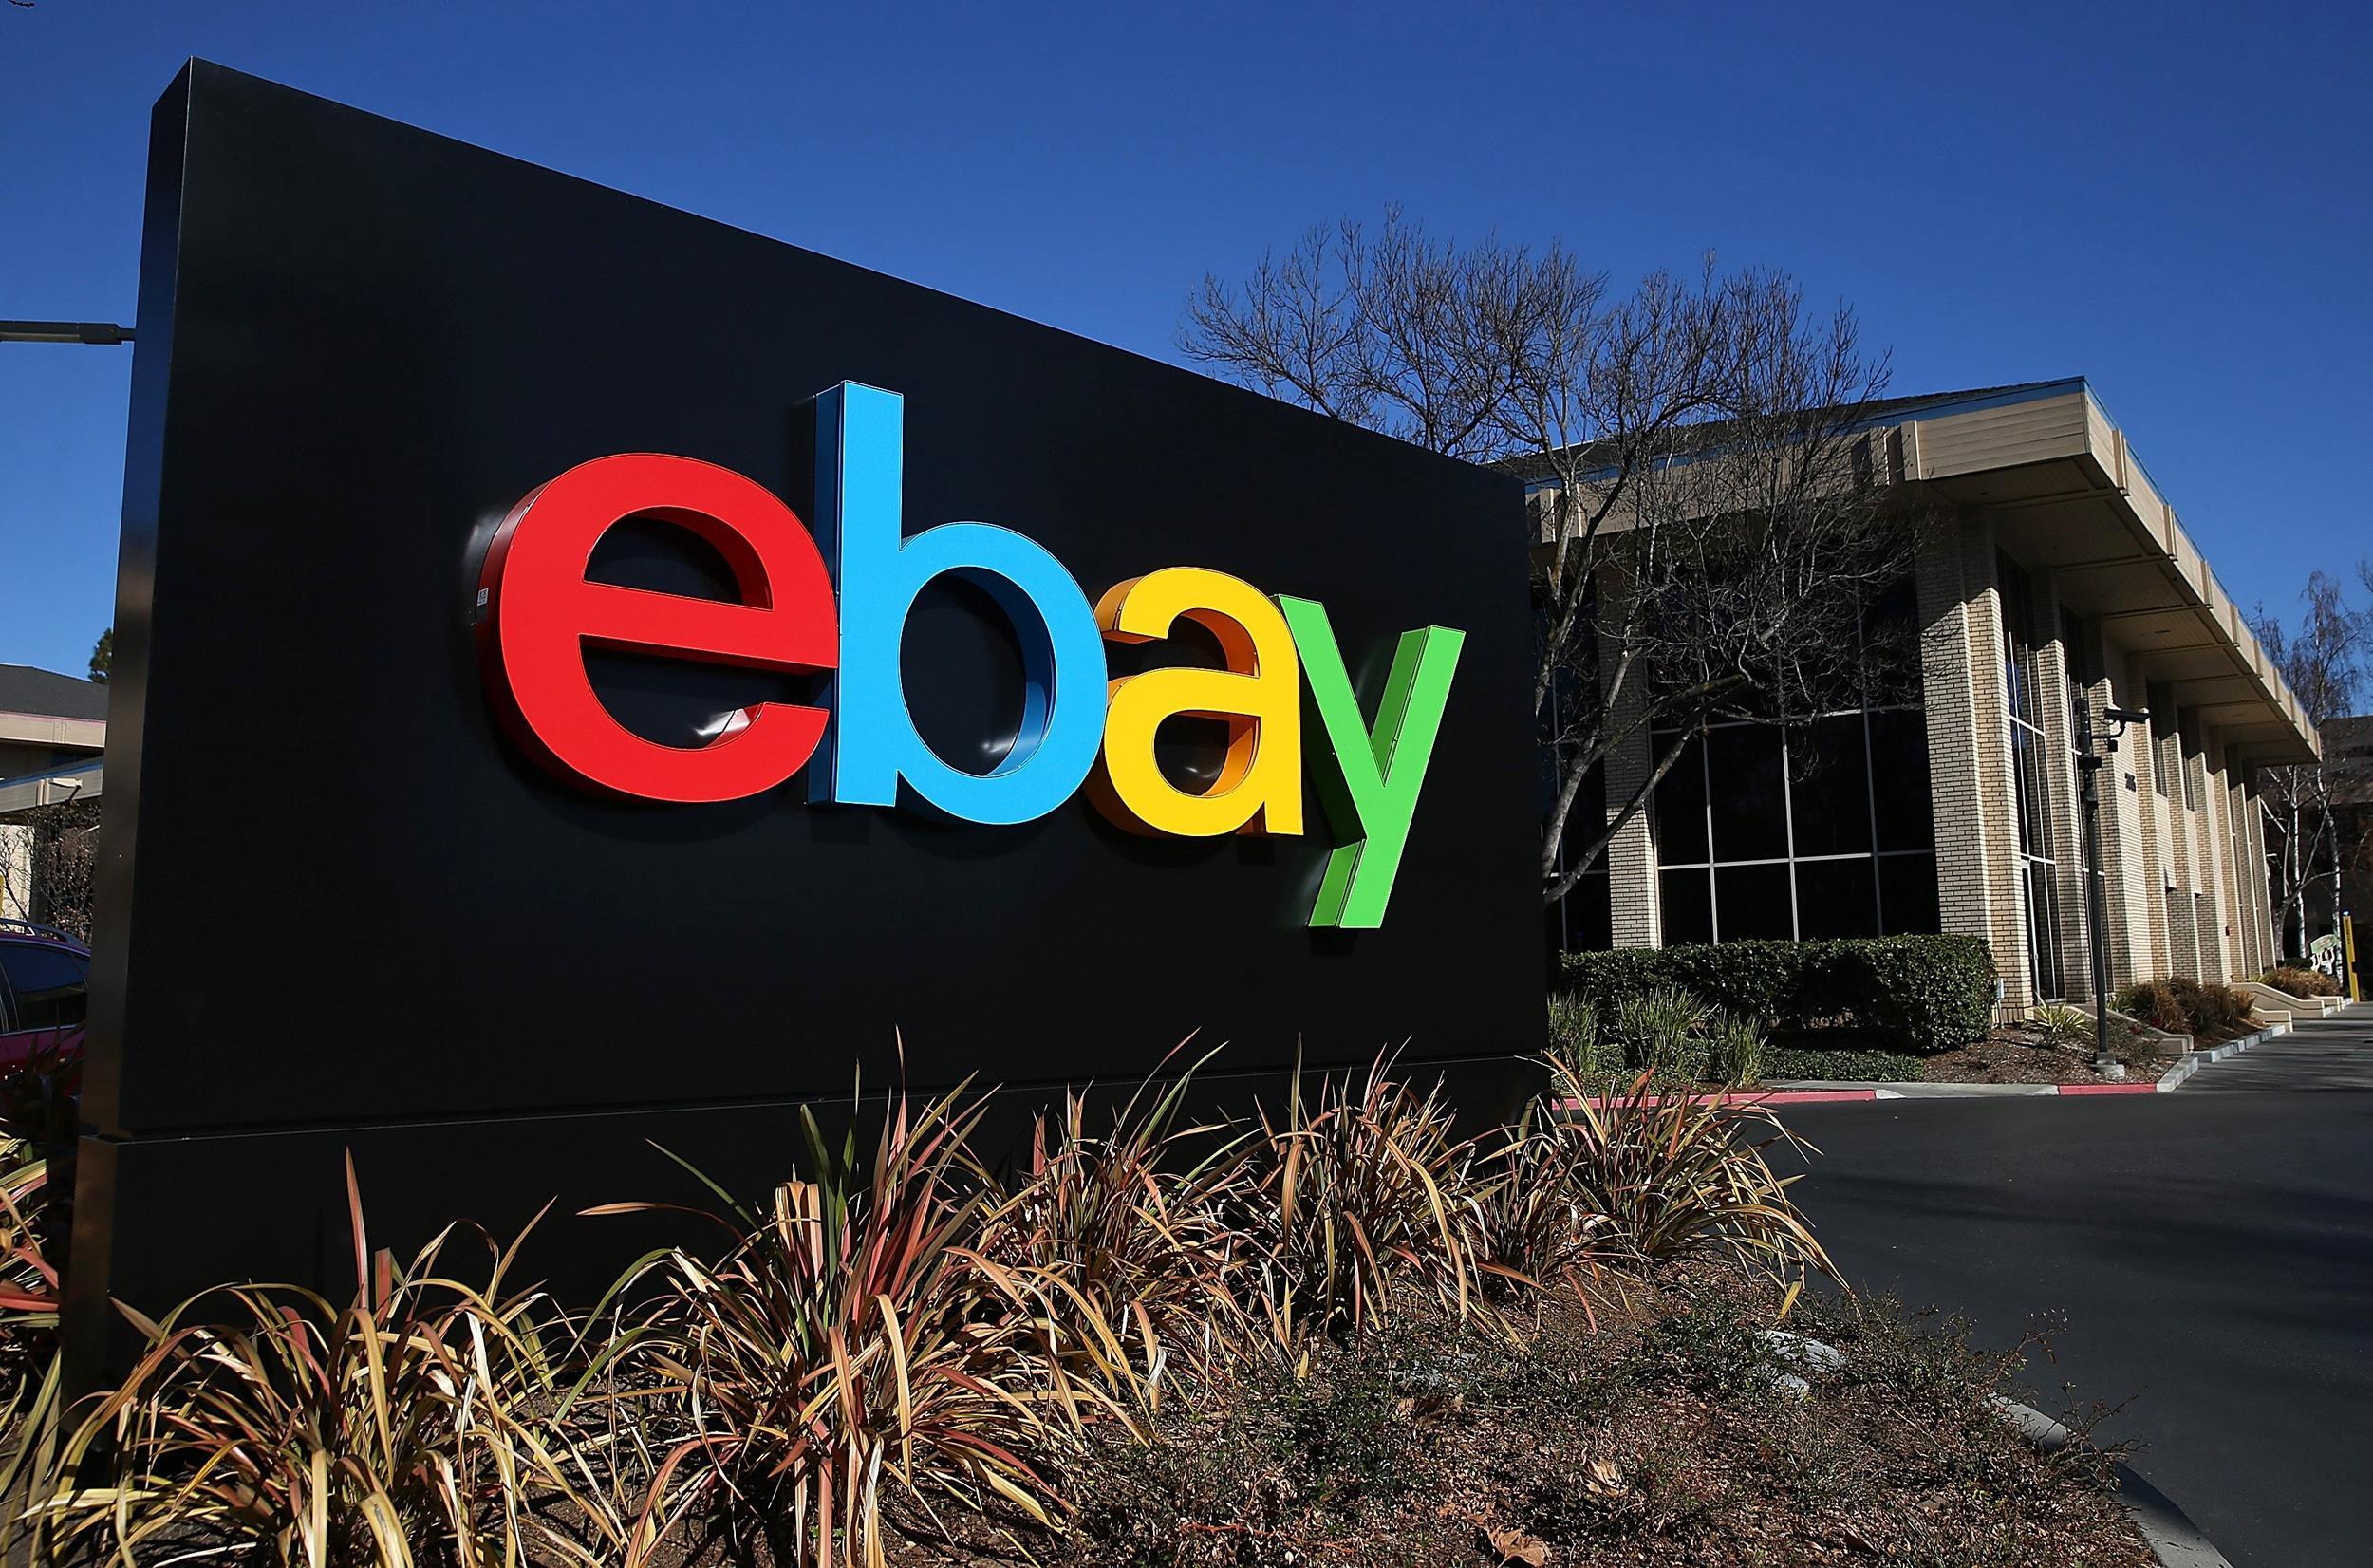 EBay To Launch an In-app Mobile ad Network in Fourth Quarter